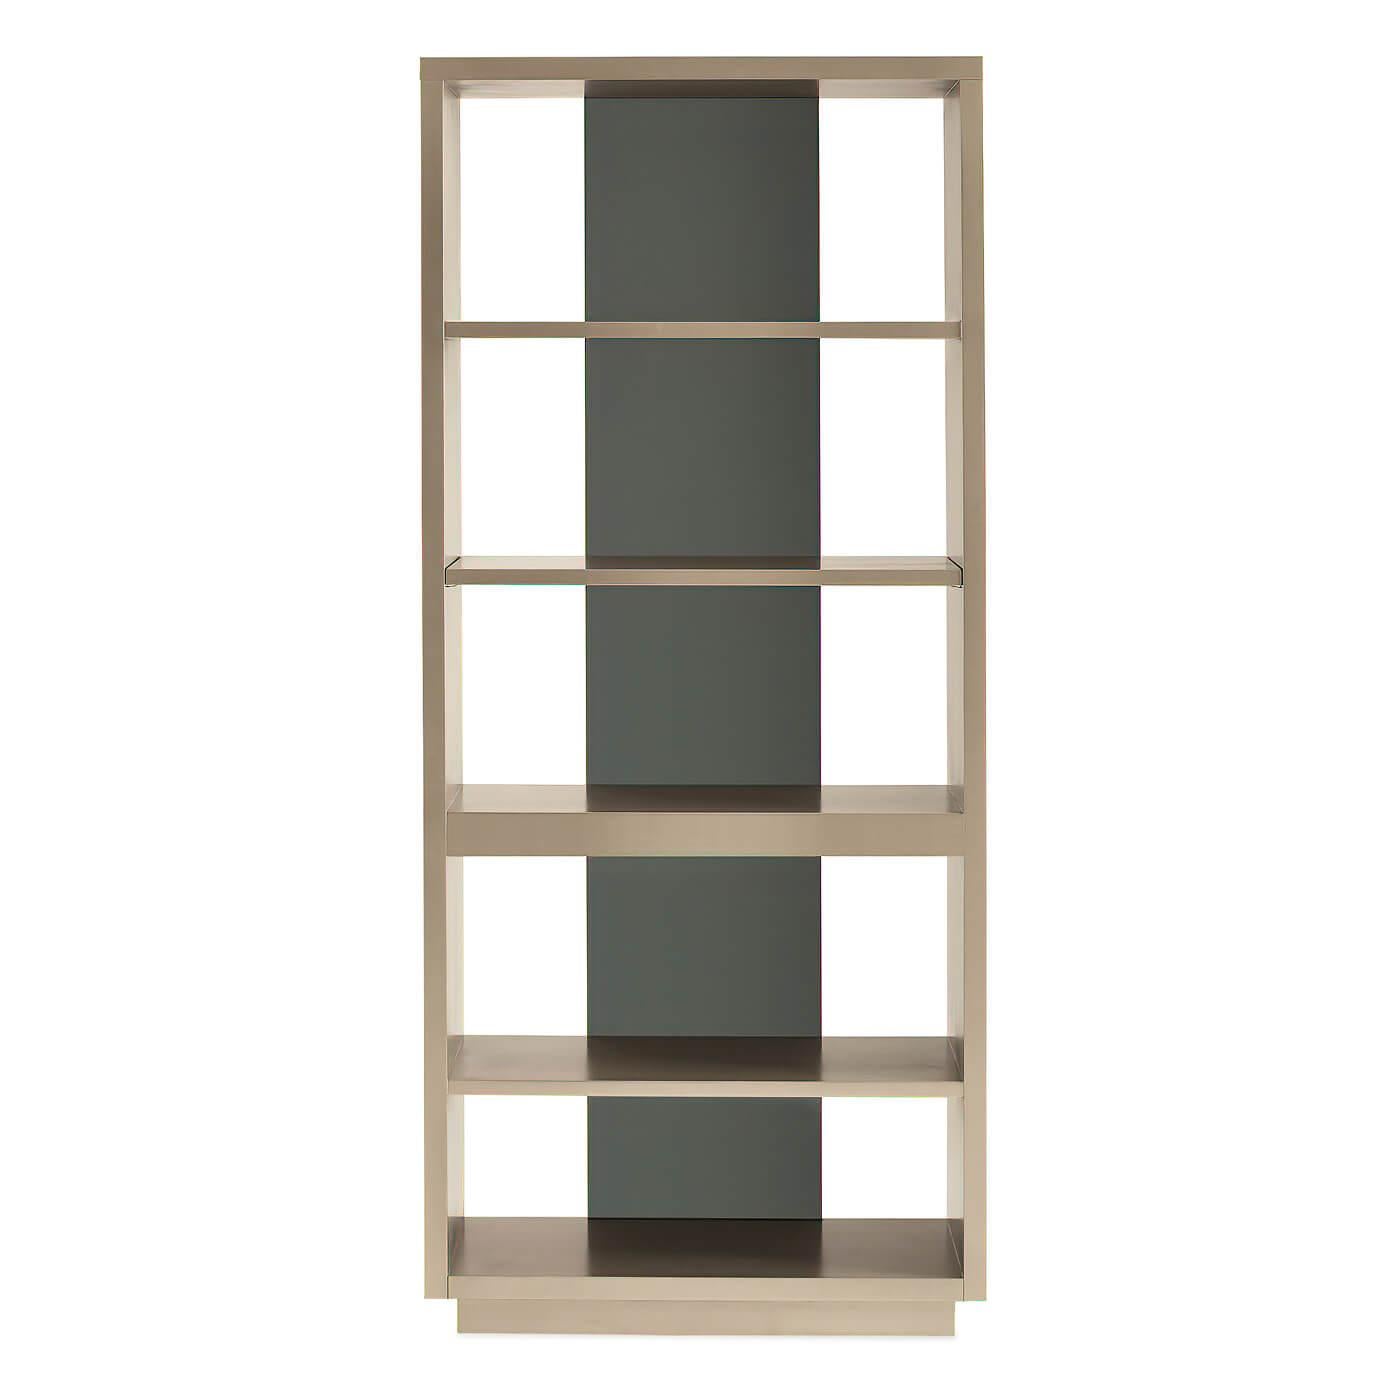 A contemporary four-shelf etagere with a panel of black glass and four shelves for storing and displaying your favorite books, photos, and treasures. A glamorous finish of Twinkling Argent highlights its thoughtfully designed form while adding